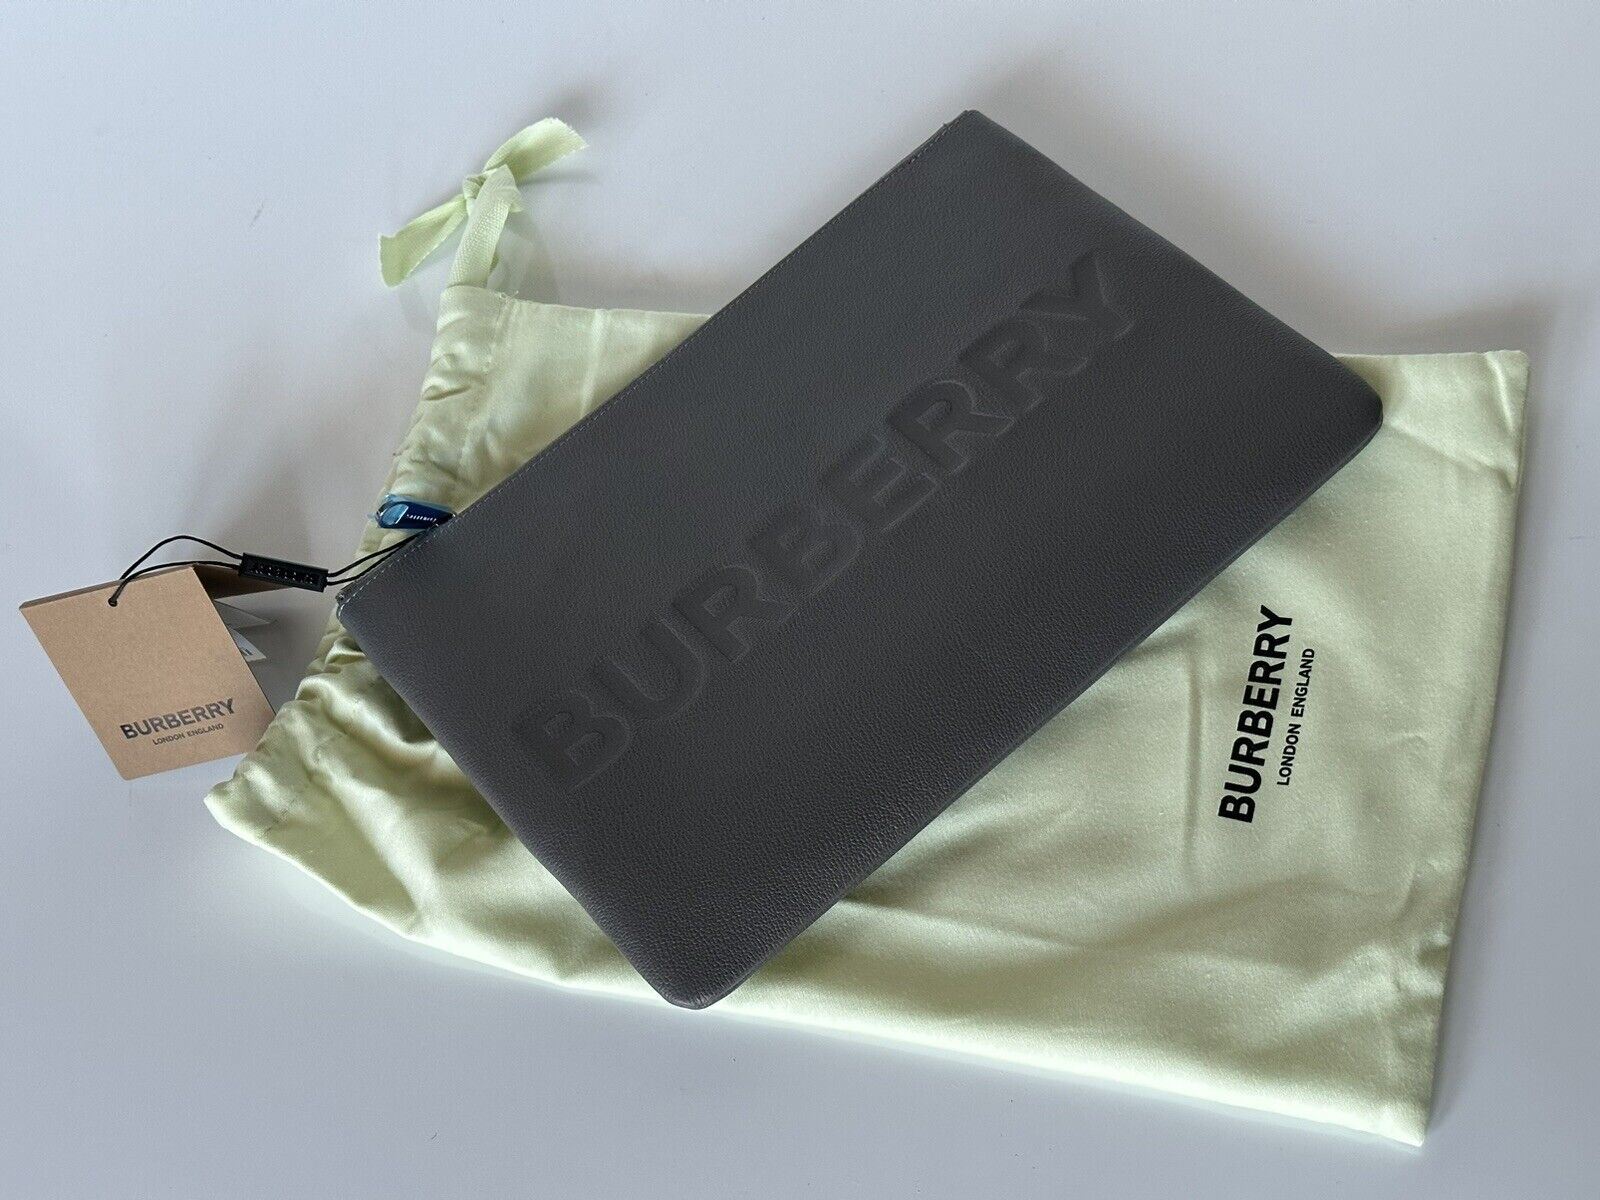 NWT $550 Burberry Charcoal Grey Leather Case Clutch 80528841